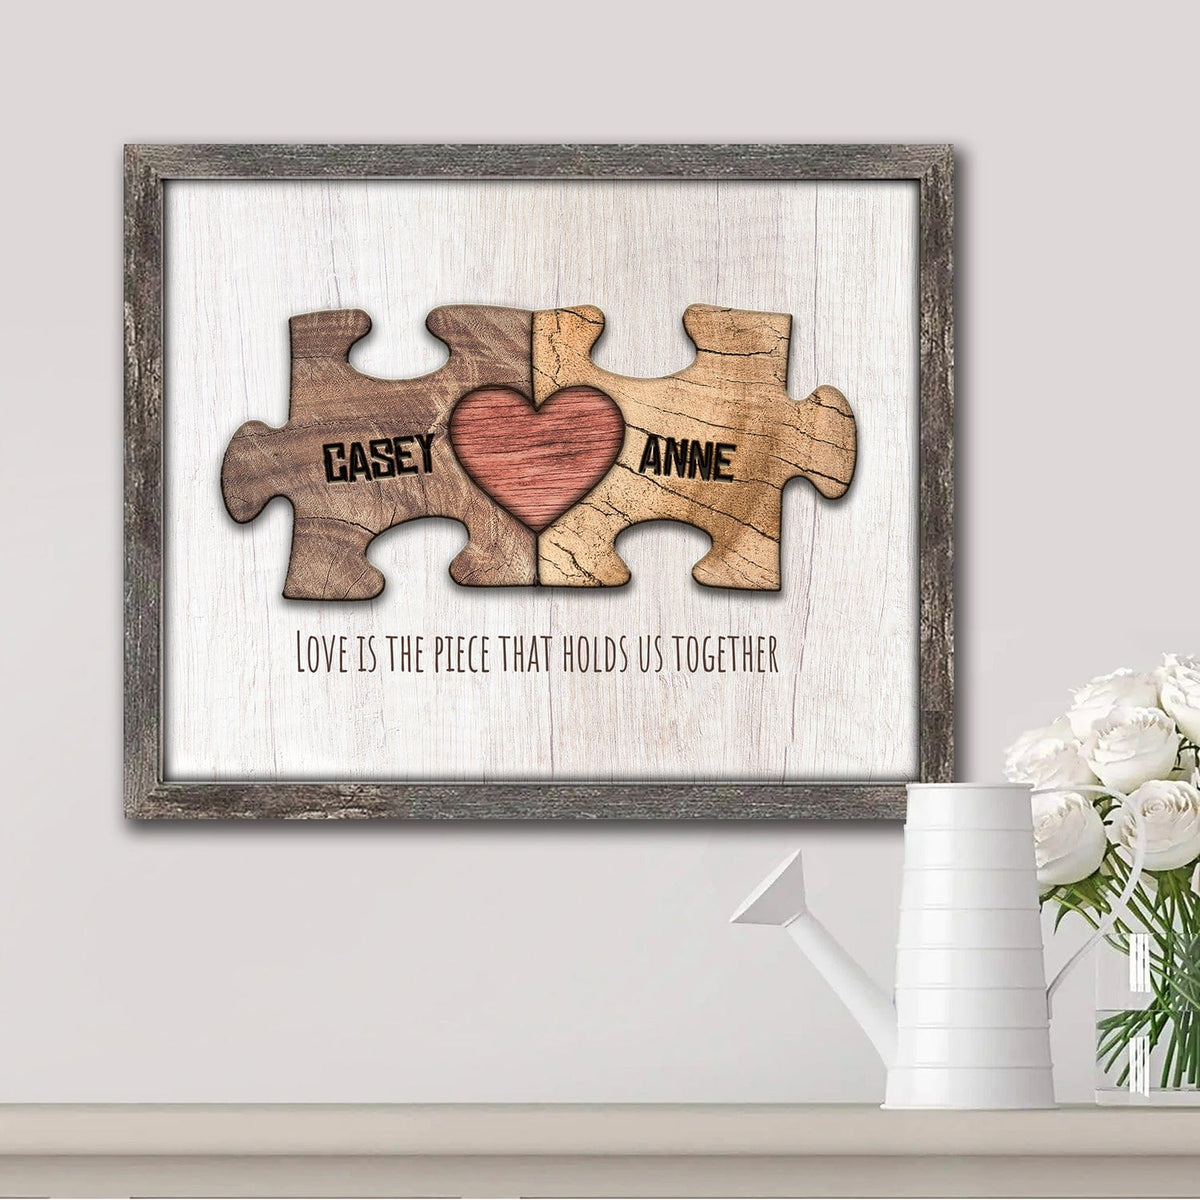 Most popular romantic personalized gift with names on puzzle pieces